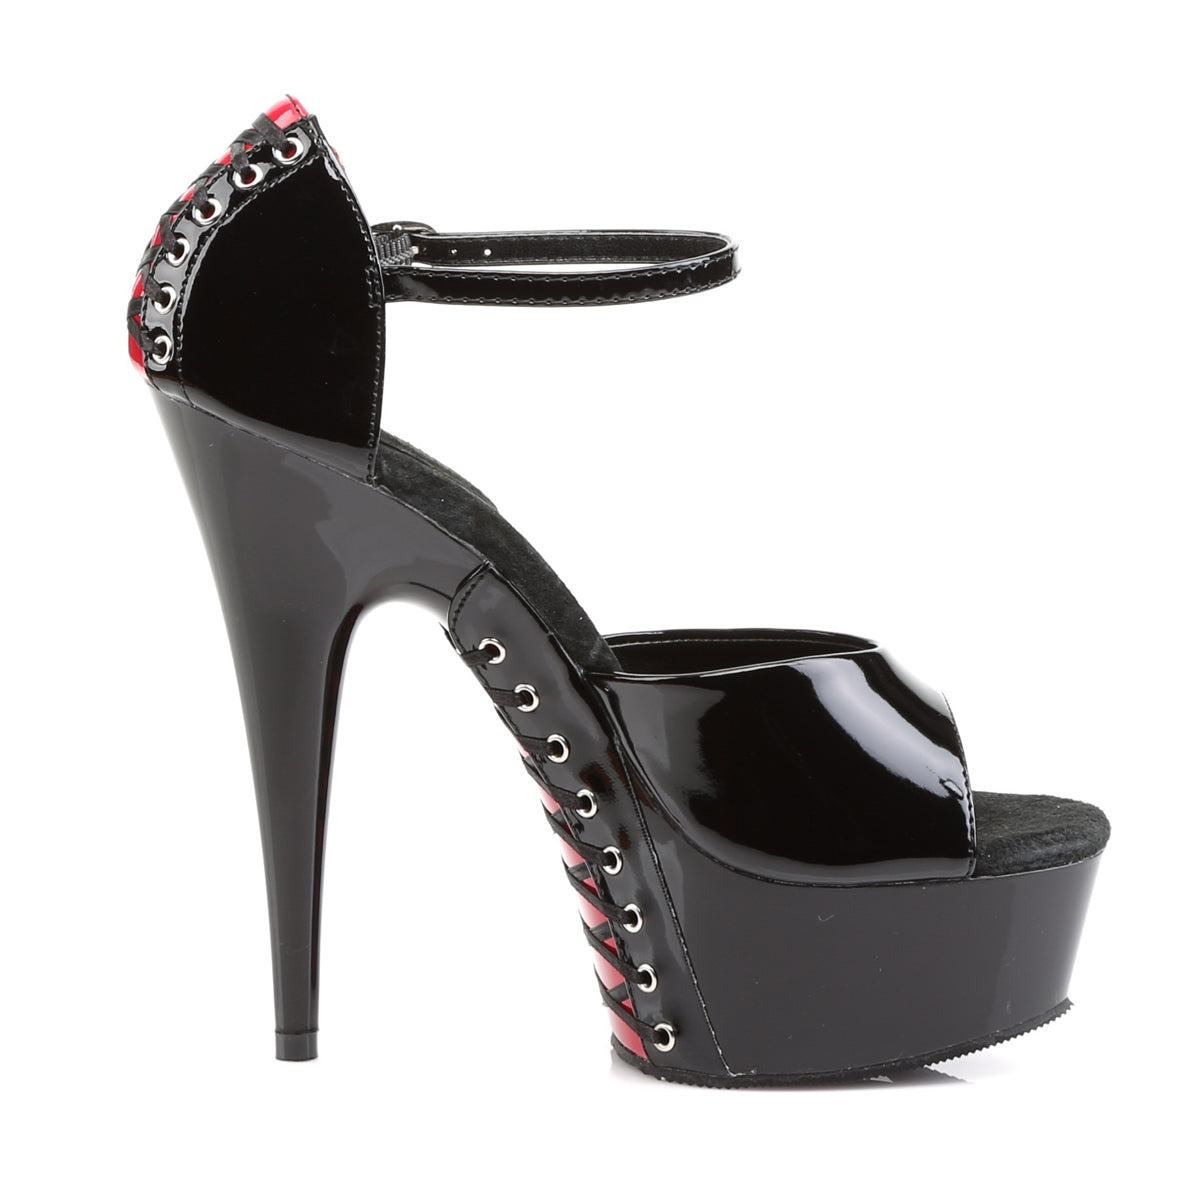 DELIGHT-660FH 6" Heel Black and Red Pole Dancing Platforms-Pleaser- Sexy Shoes Fetish Heels